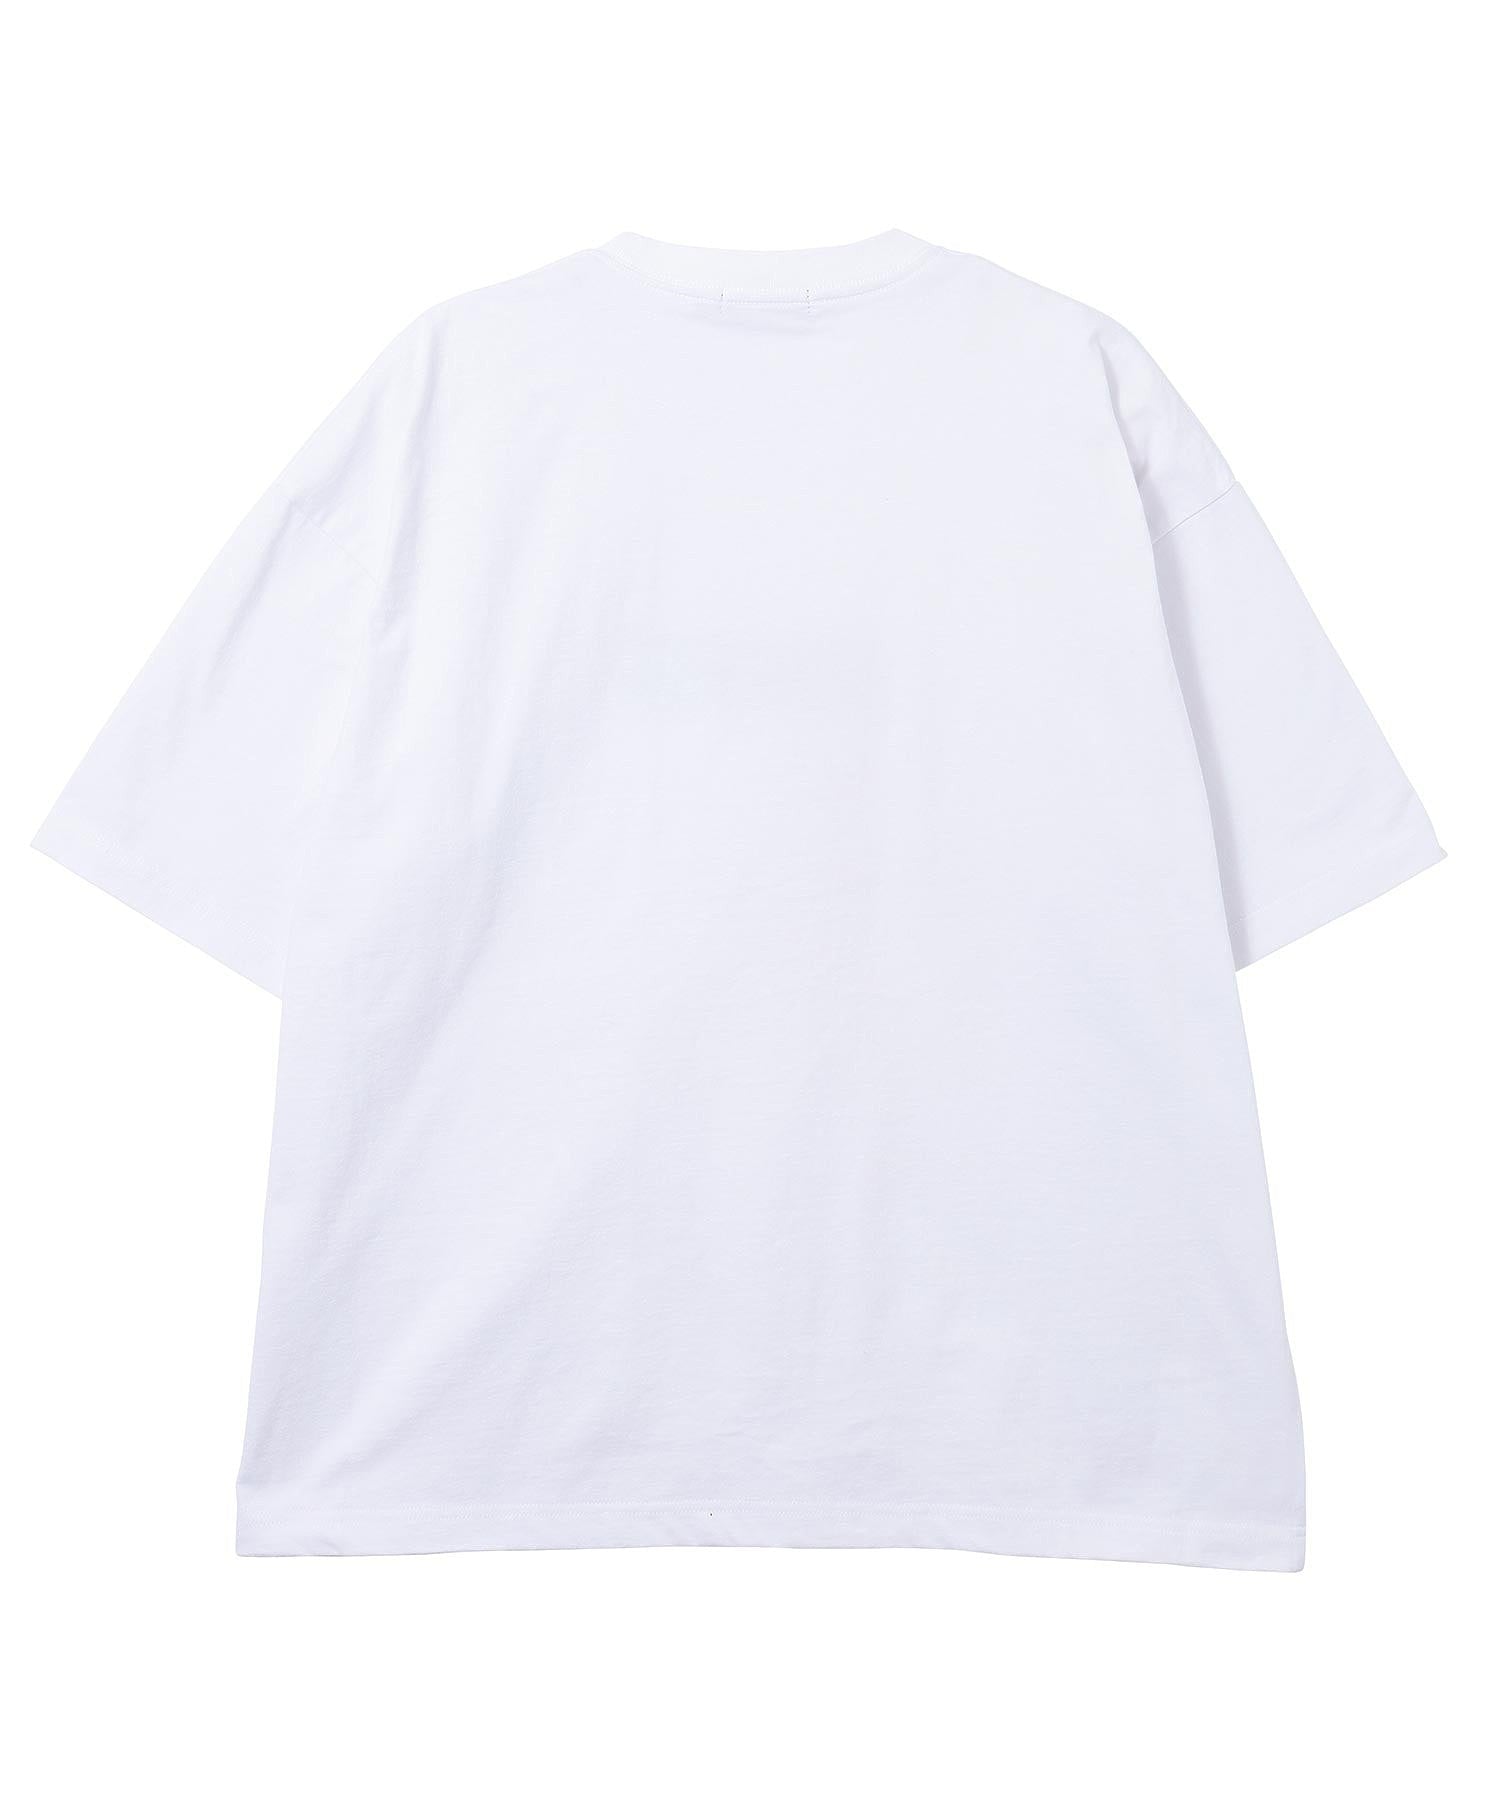 EMBROIDERY LOGO WIDE S/S TEE SILAS